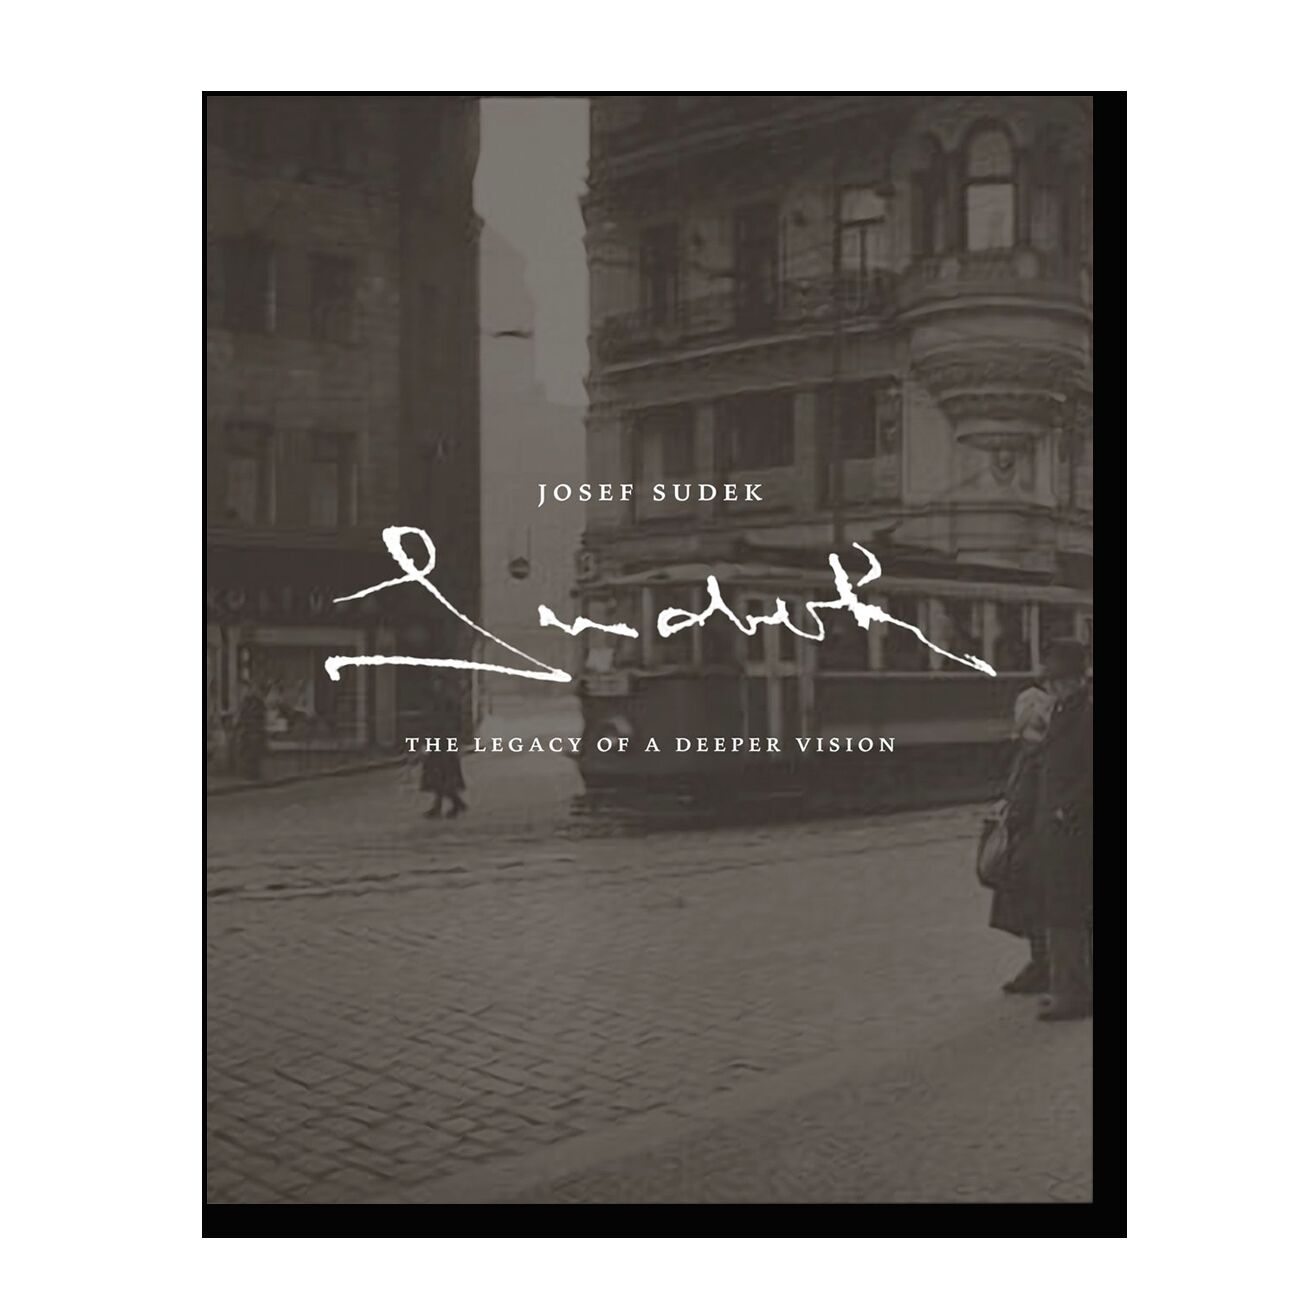 Josef Sudek: The Legacy of a Deeper Vision